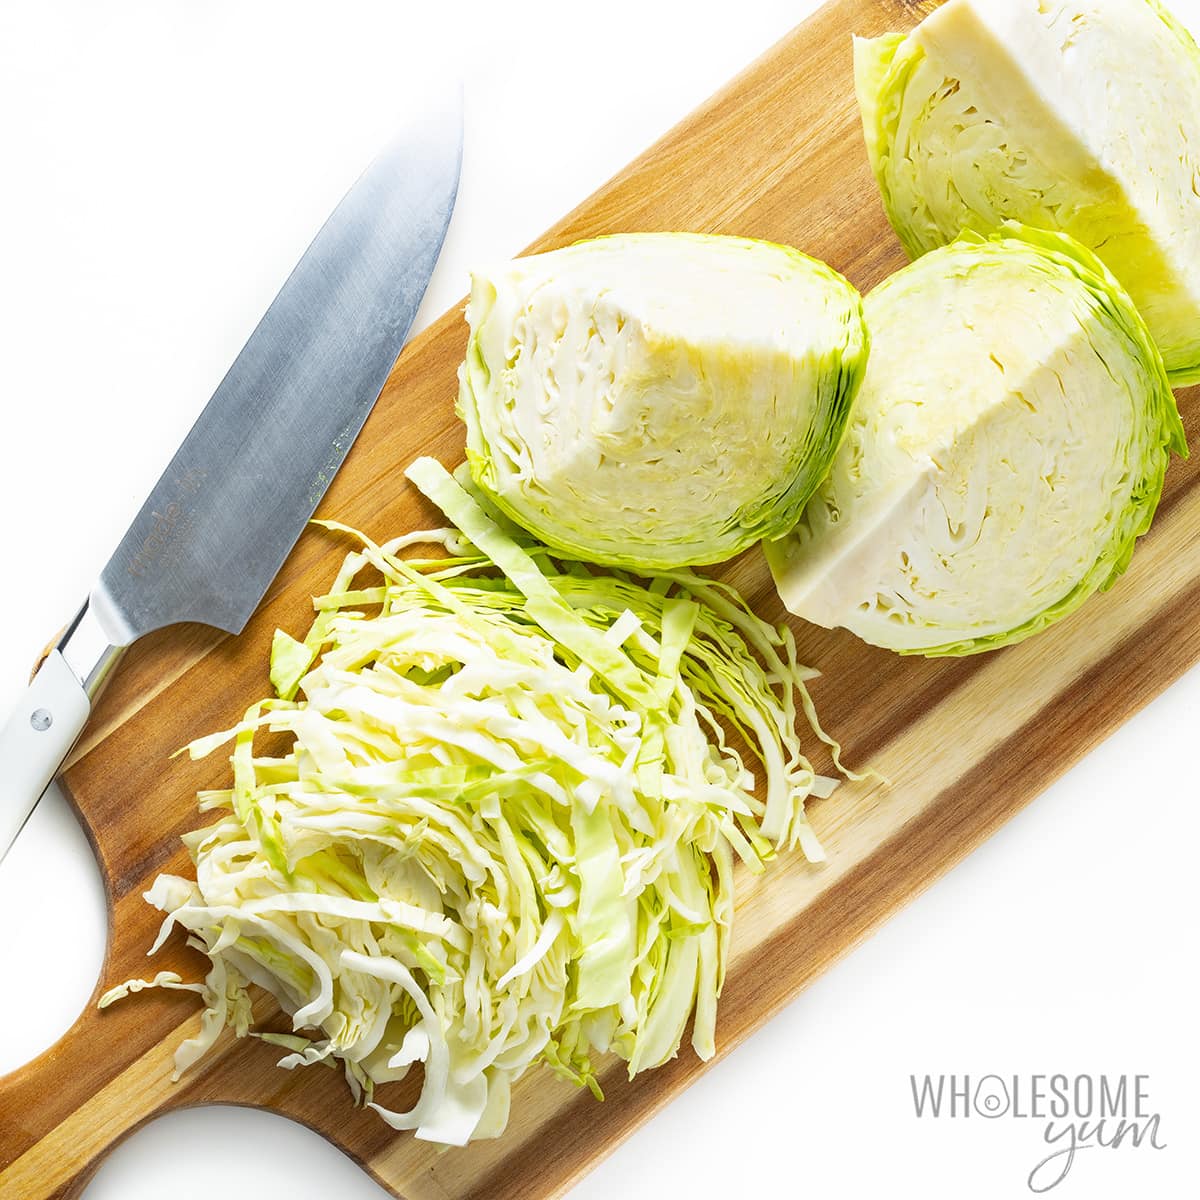 How to cut cabbage.